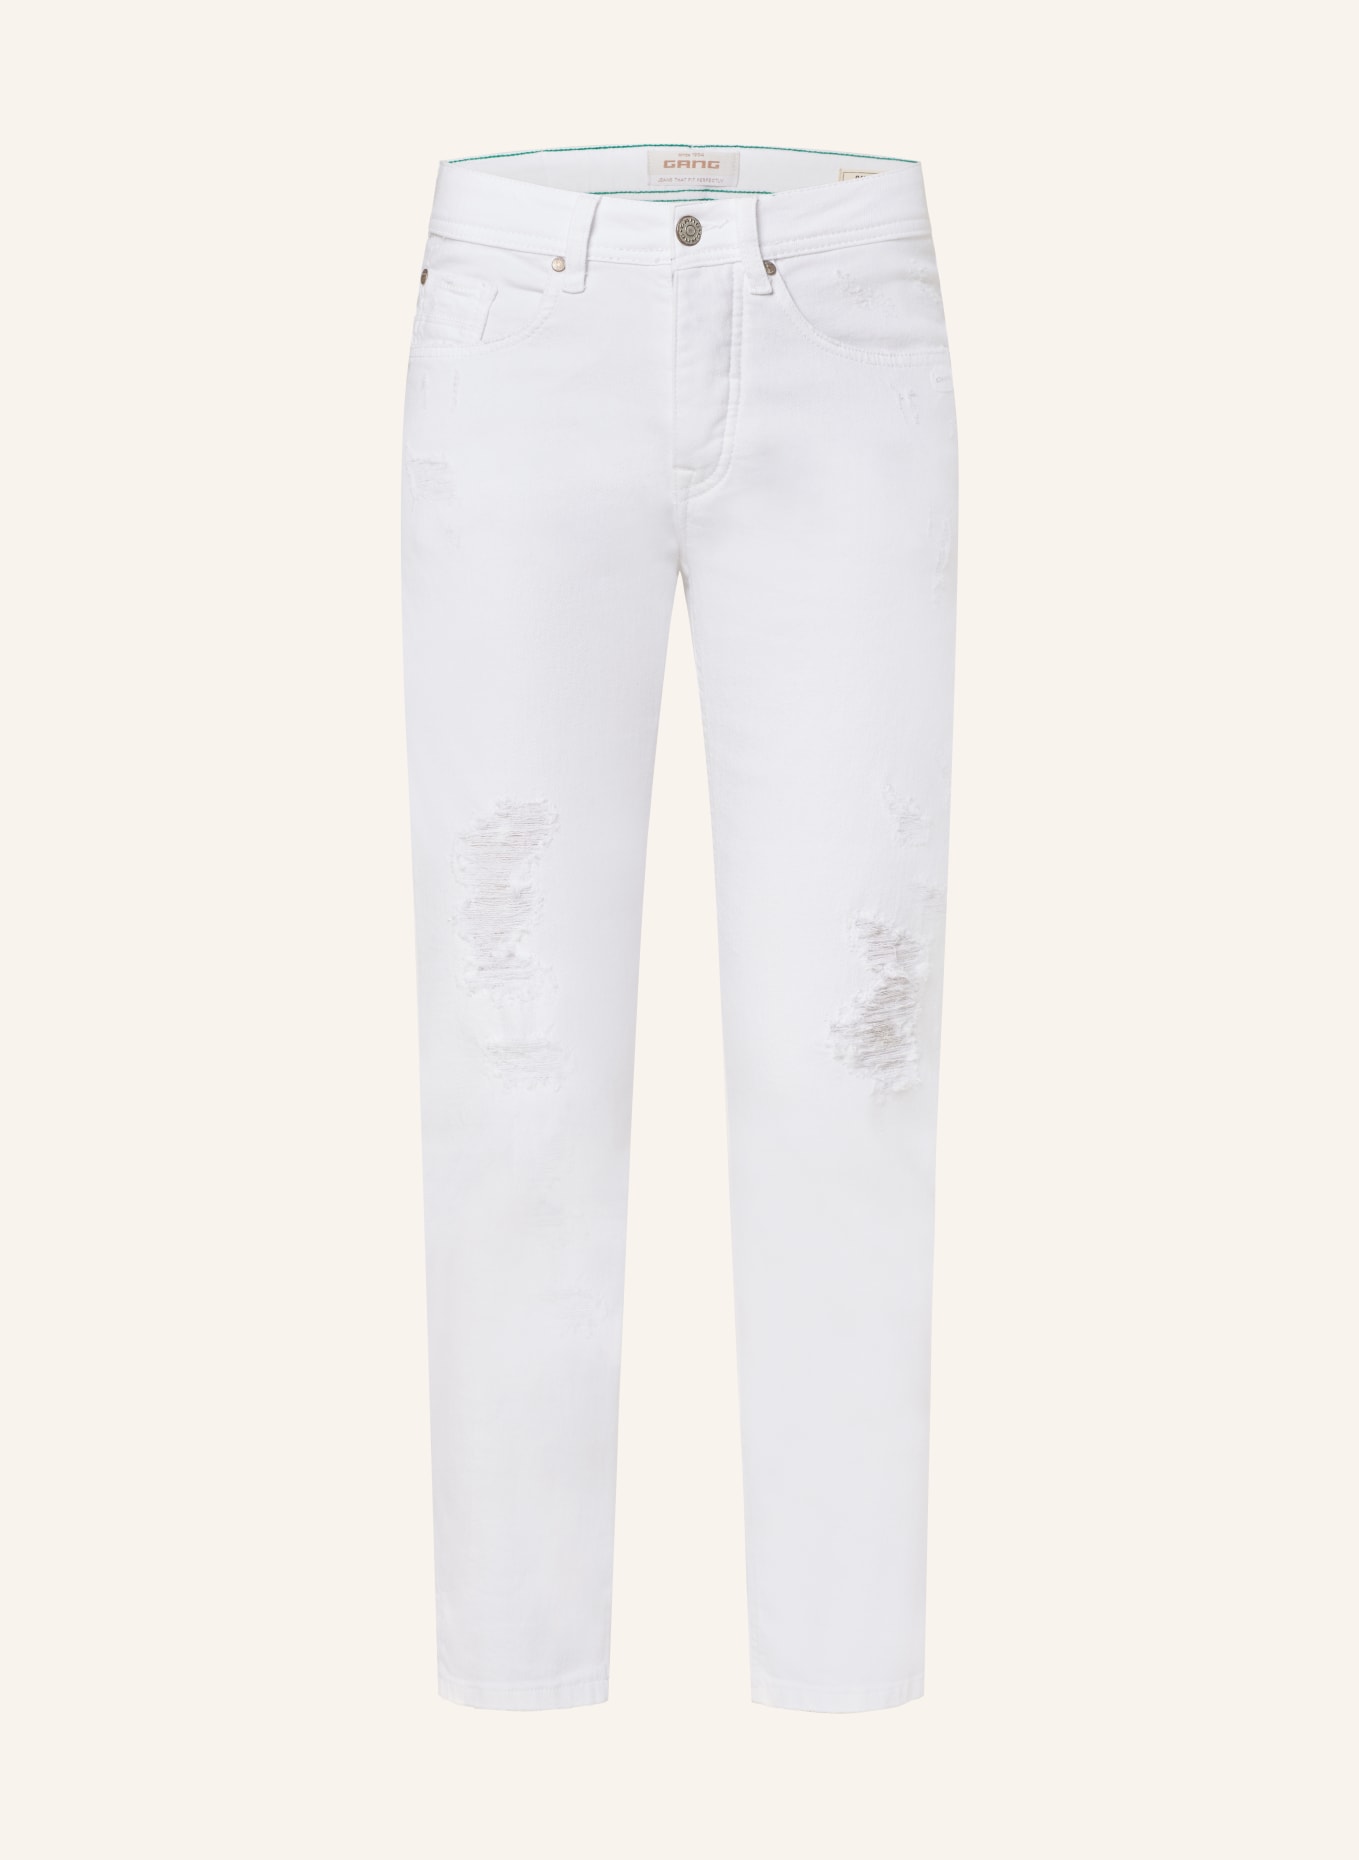 GANG 7/8 jeans NICA, Color: 7107 white destoyed (Image 1)